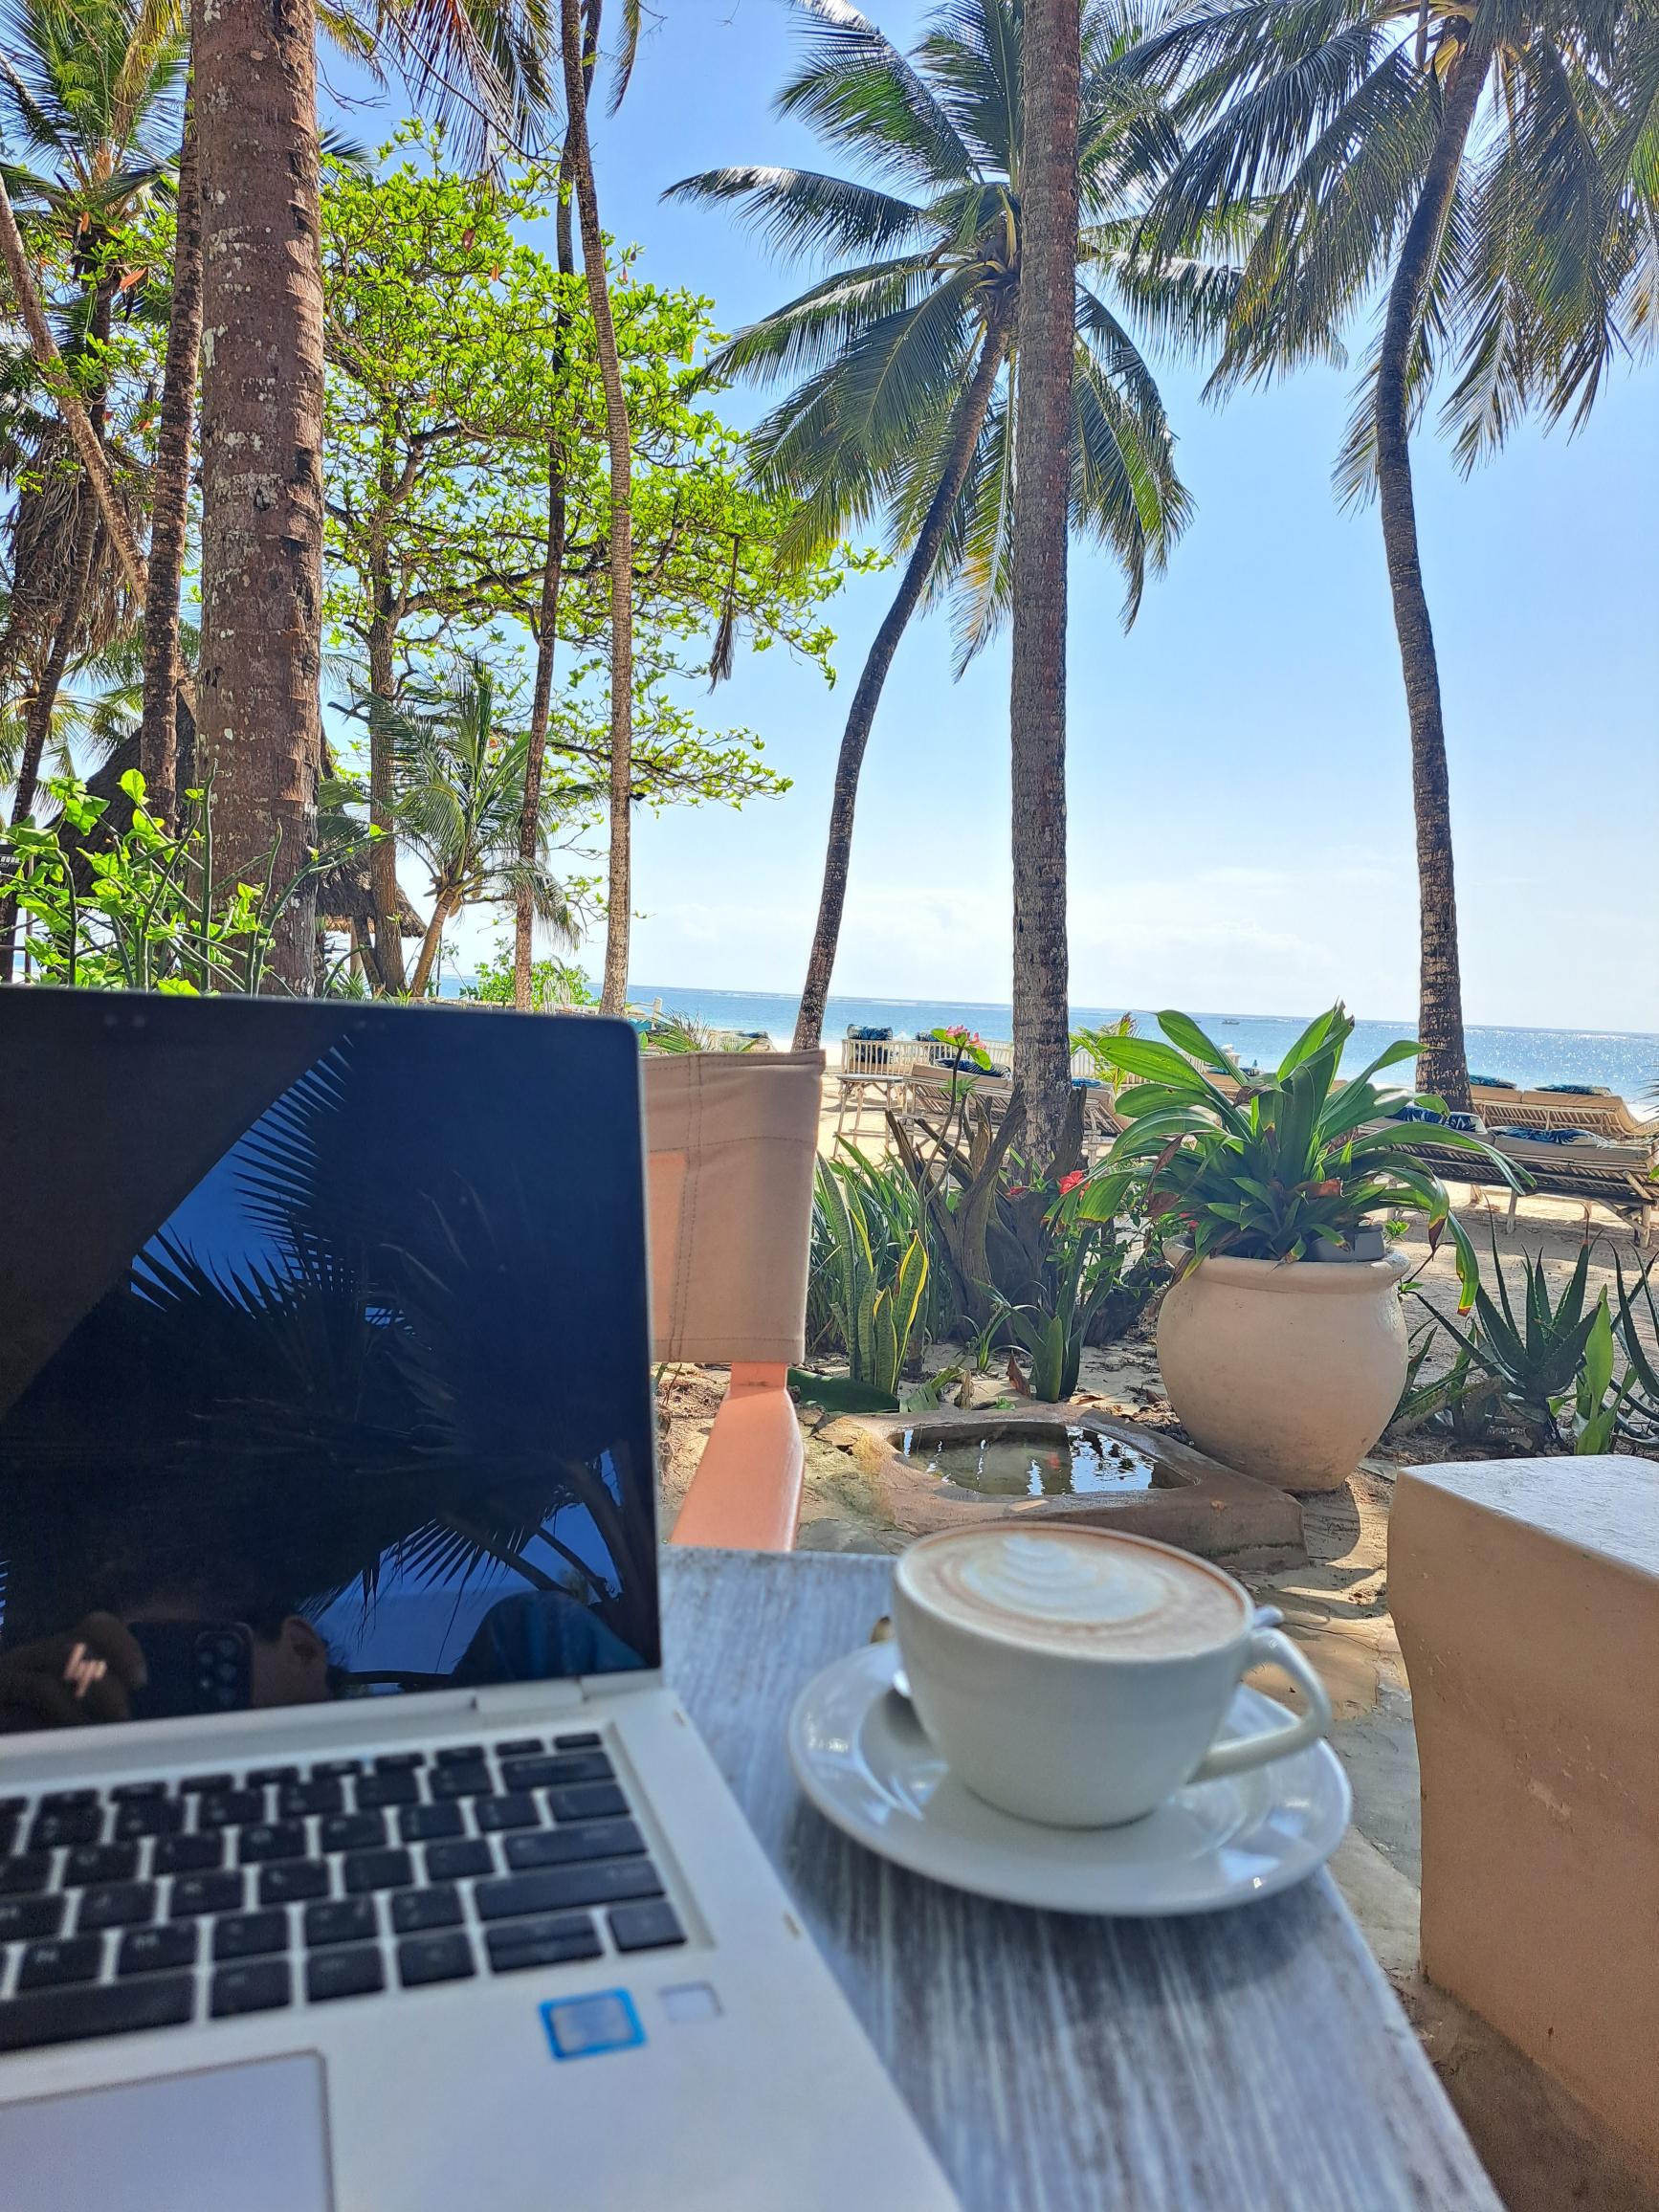 Places to work from in Kenya as a Digital Nomad in Diani